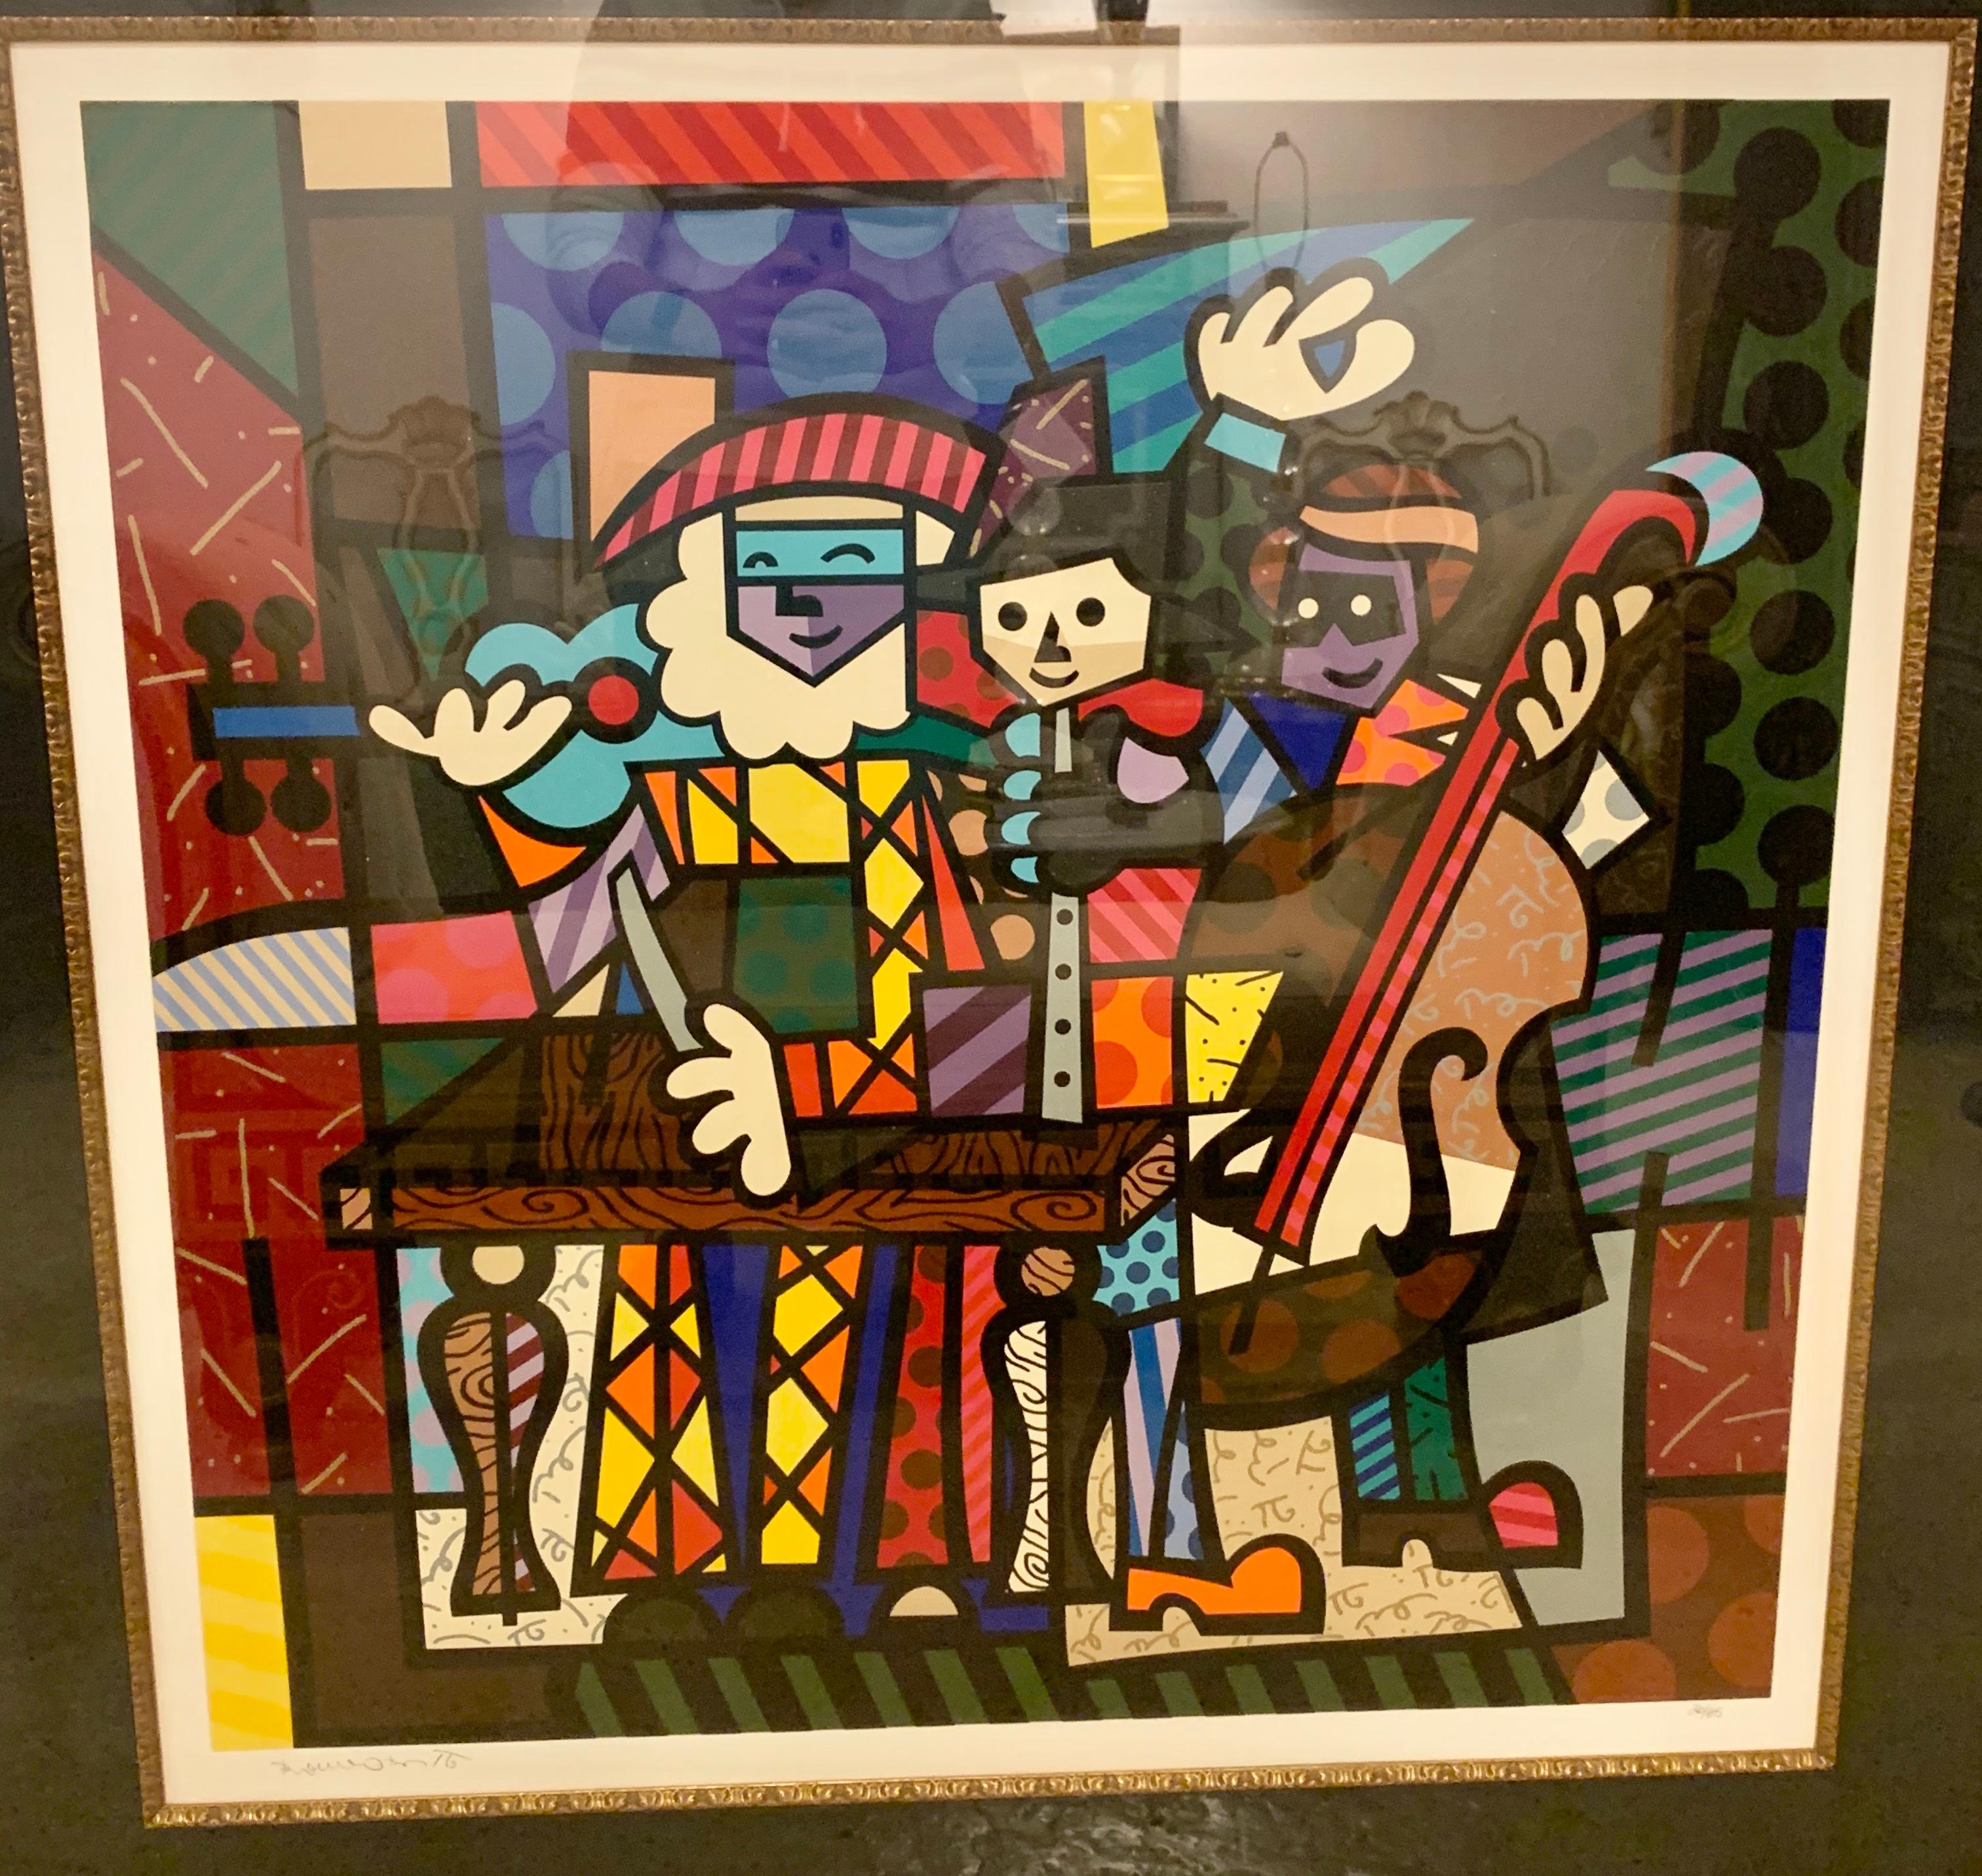 Modern large colorful signed Print of Musicians.

Greg.